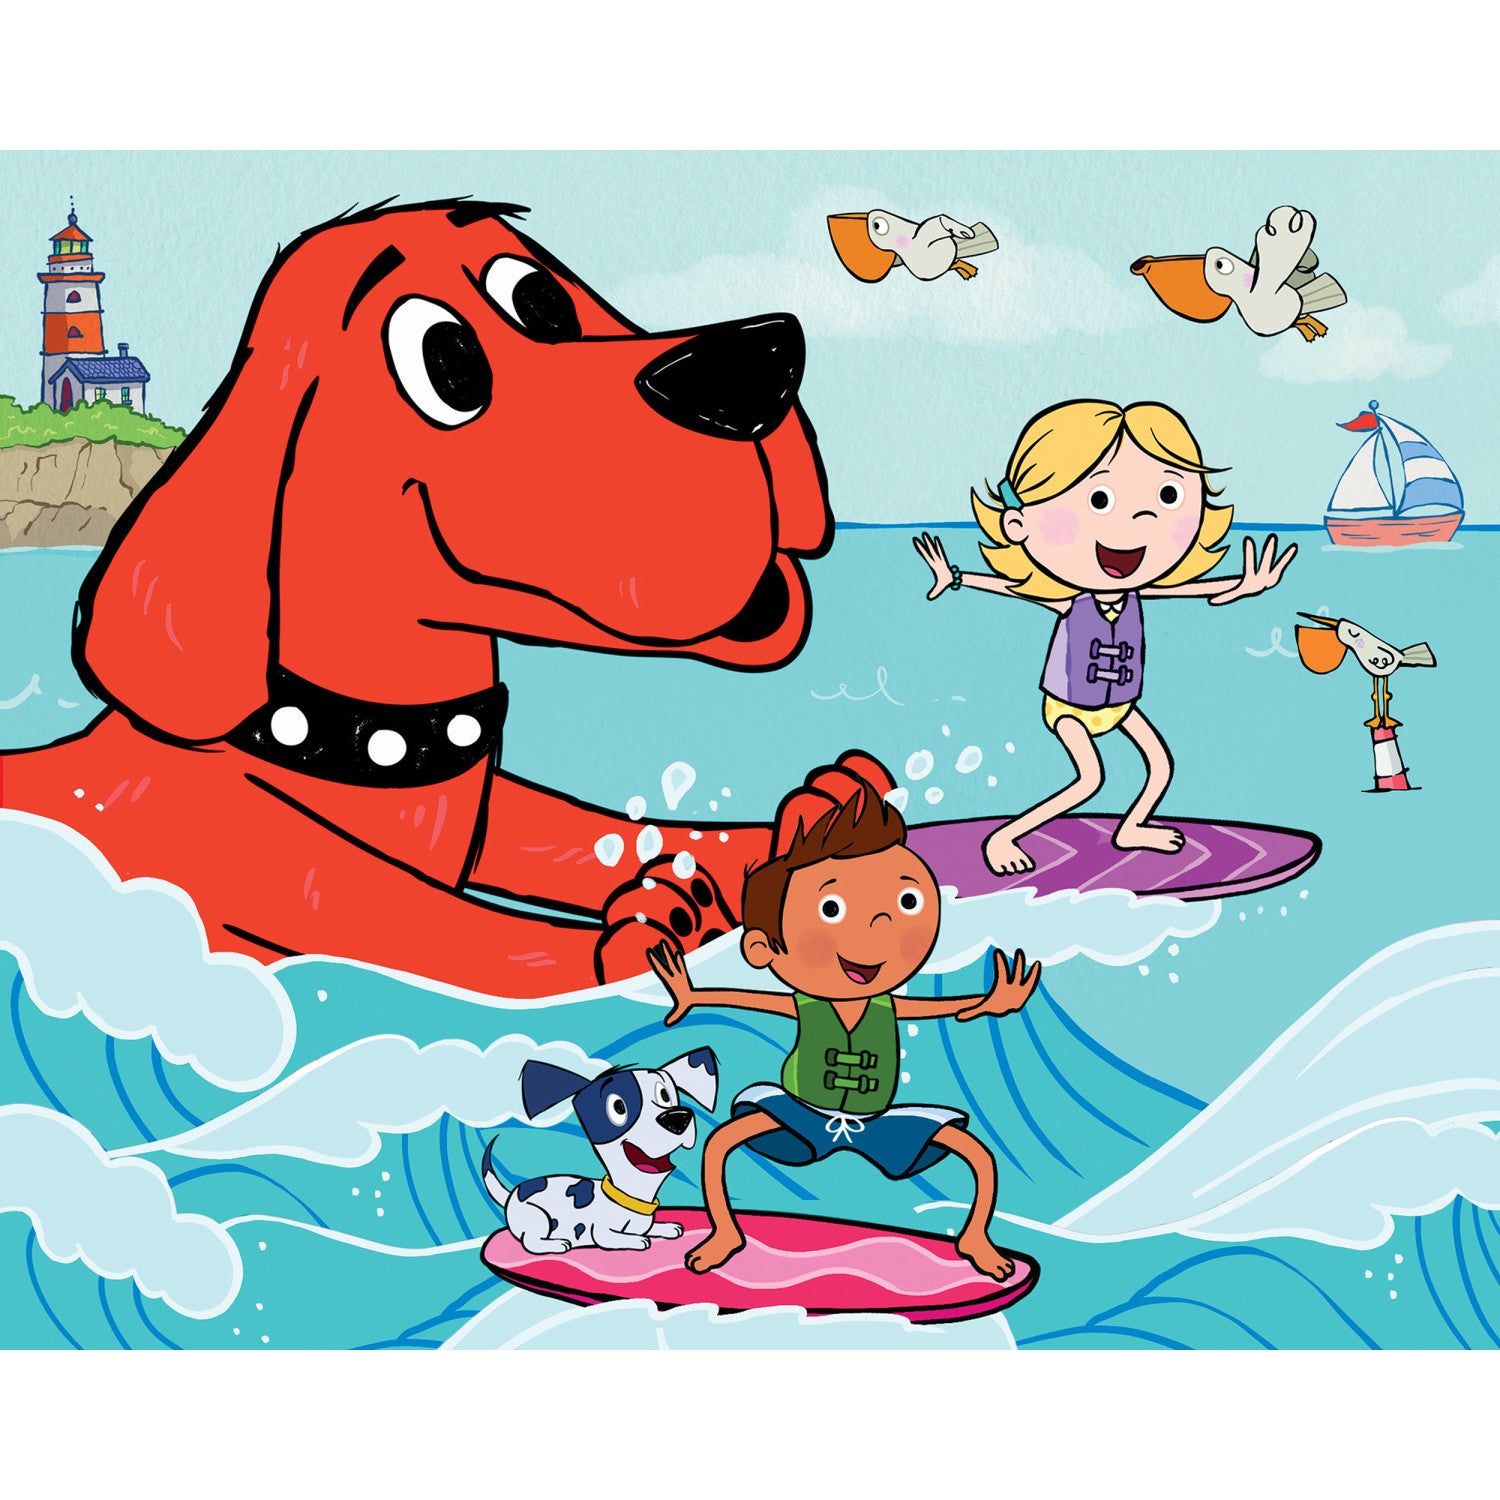 Clifford 100 Piece Jigsaw Puzzles 4-Pack